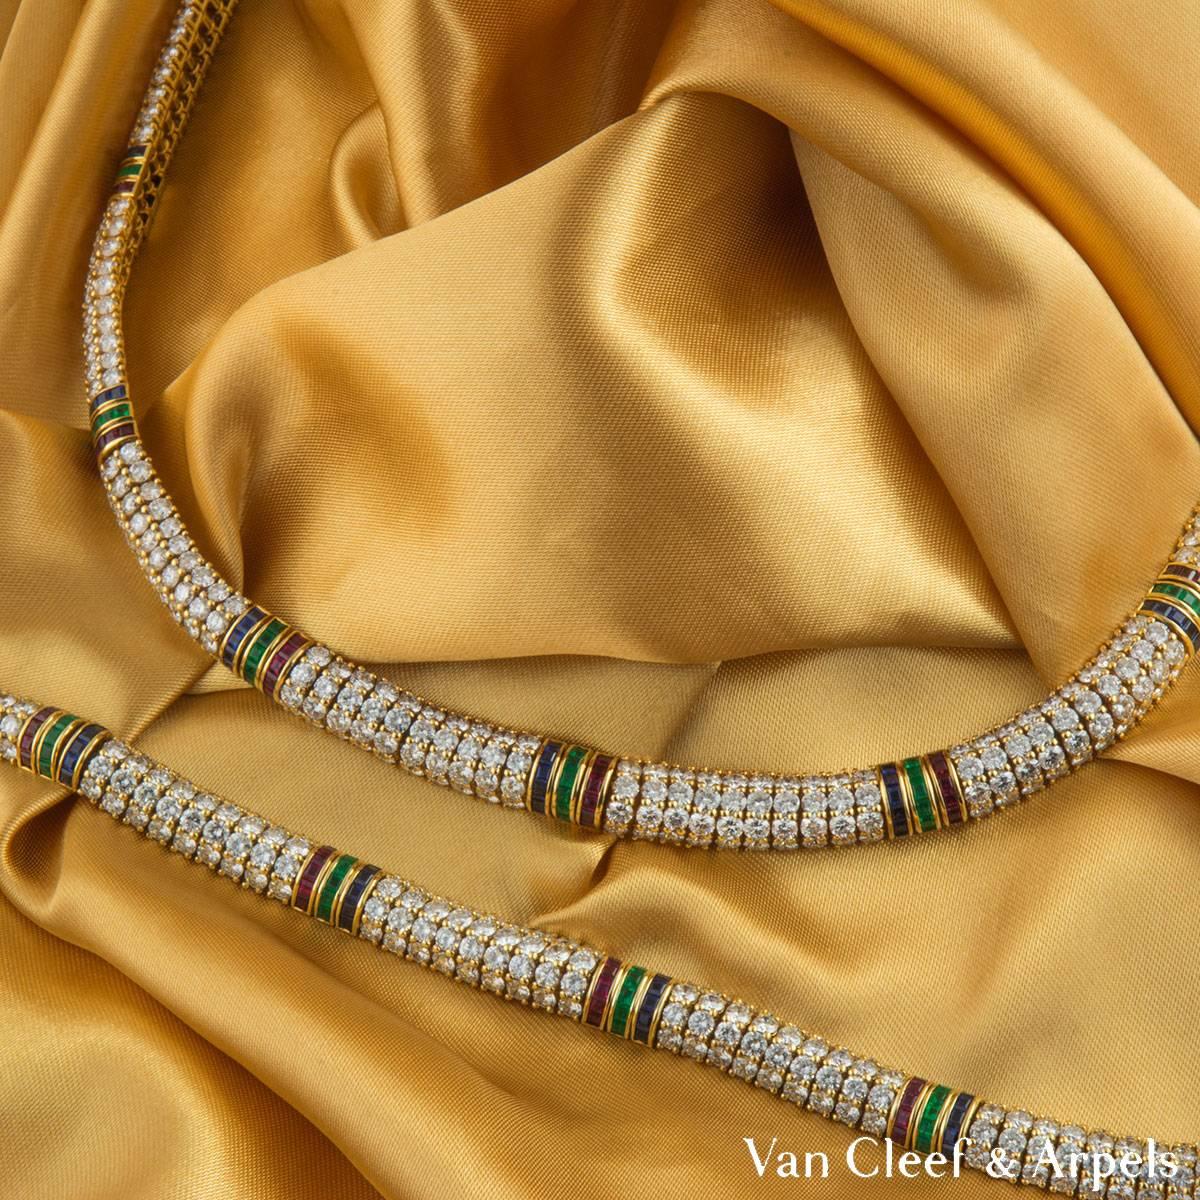 A beautiful 18k yellow gold multi-gemstone Van Cleef & Arpels jewellery suite. The jewellery suite features a line necklace and line bracelet. The necklace comprises of 4 rows of round brilliant cut diamonds, complemented with 10 block rows of